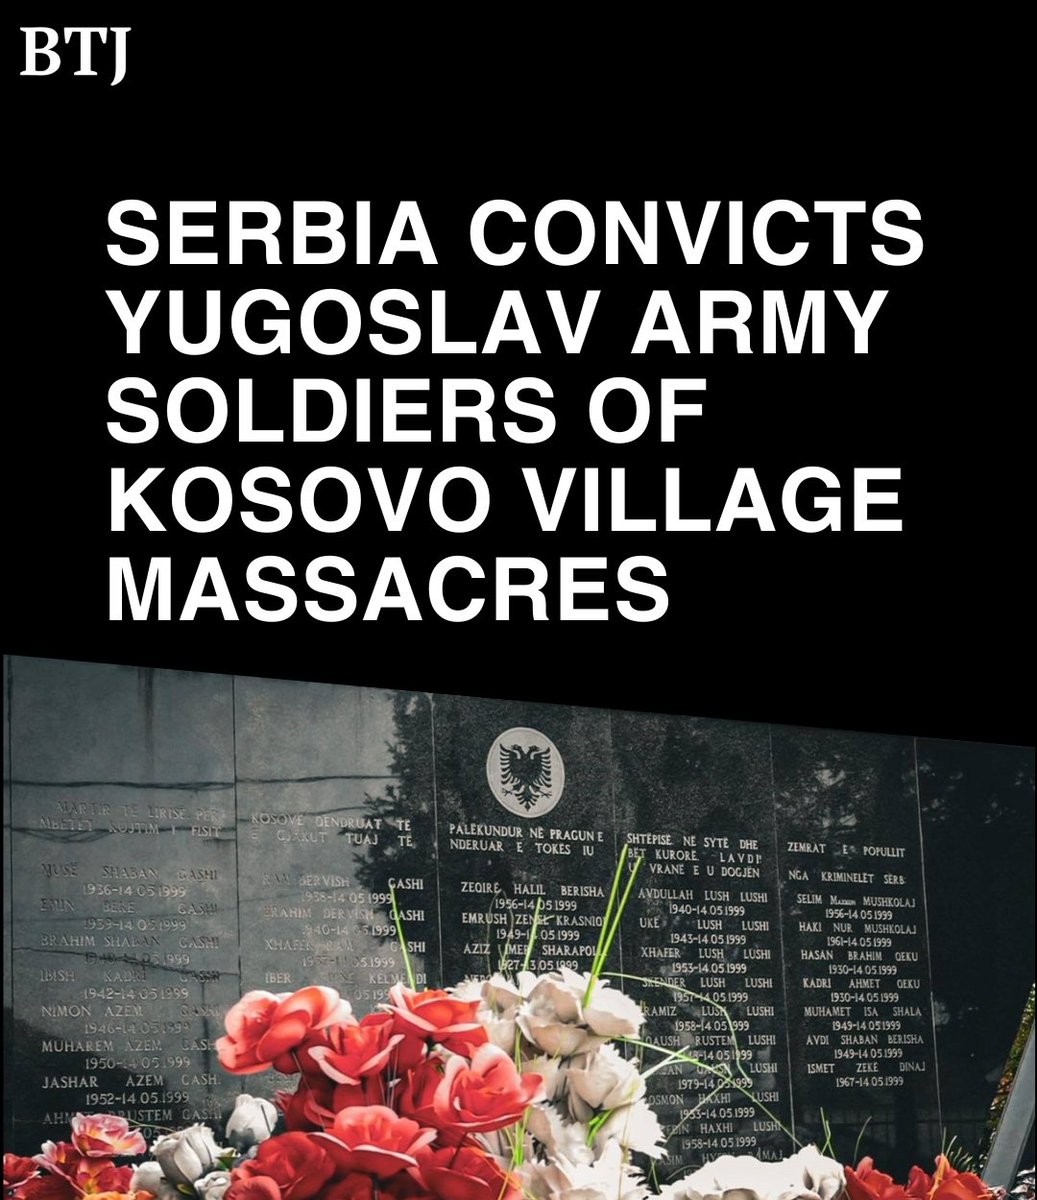 A Serbian court sentenced seven former Yugoslav Army soldiers to a total of 56 years in prison for committing war crimes during attacks on Kosovo villages in 1999 that left 118 ethnic Albanians dead